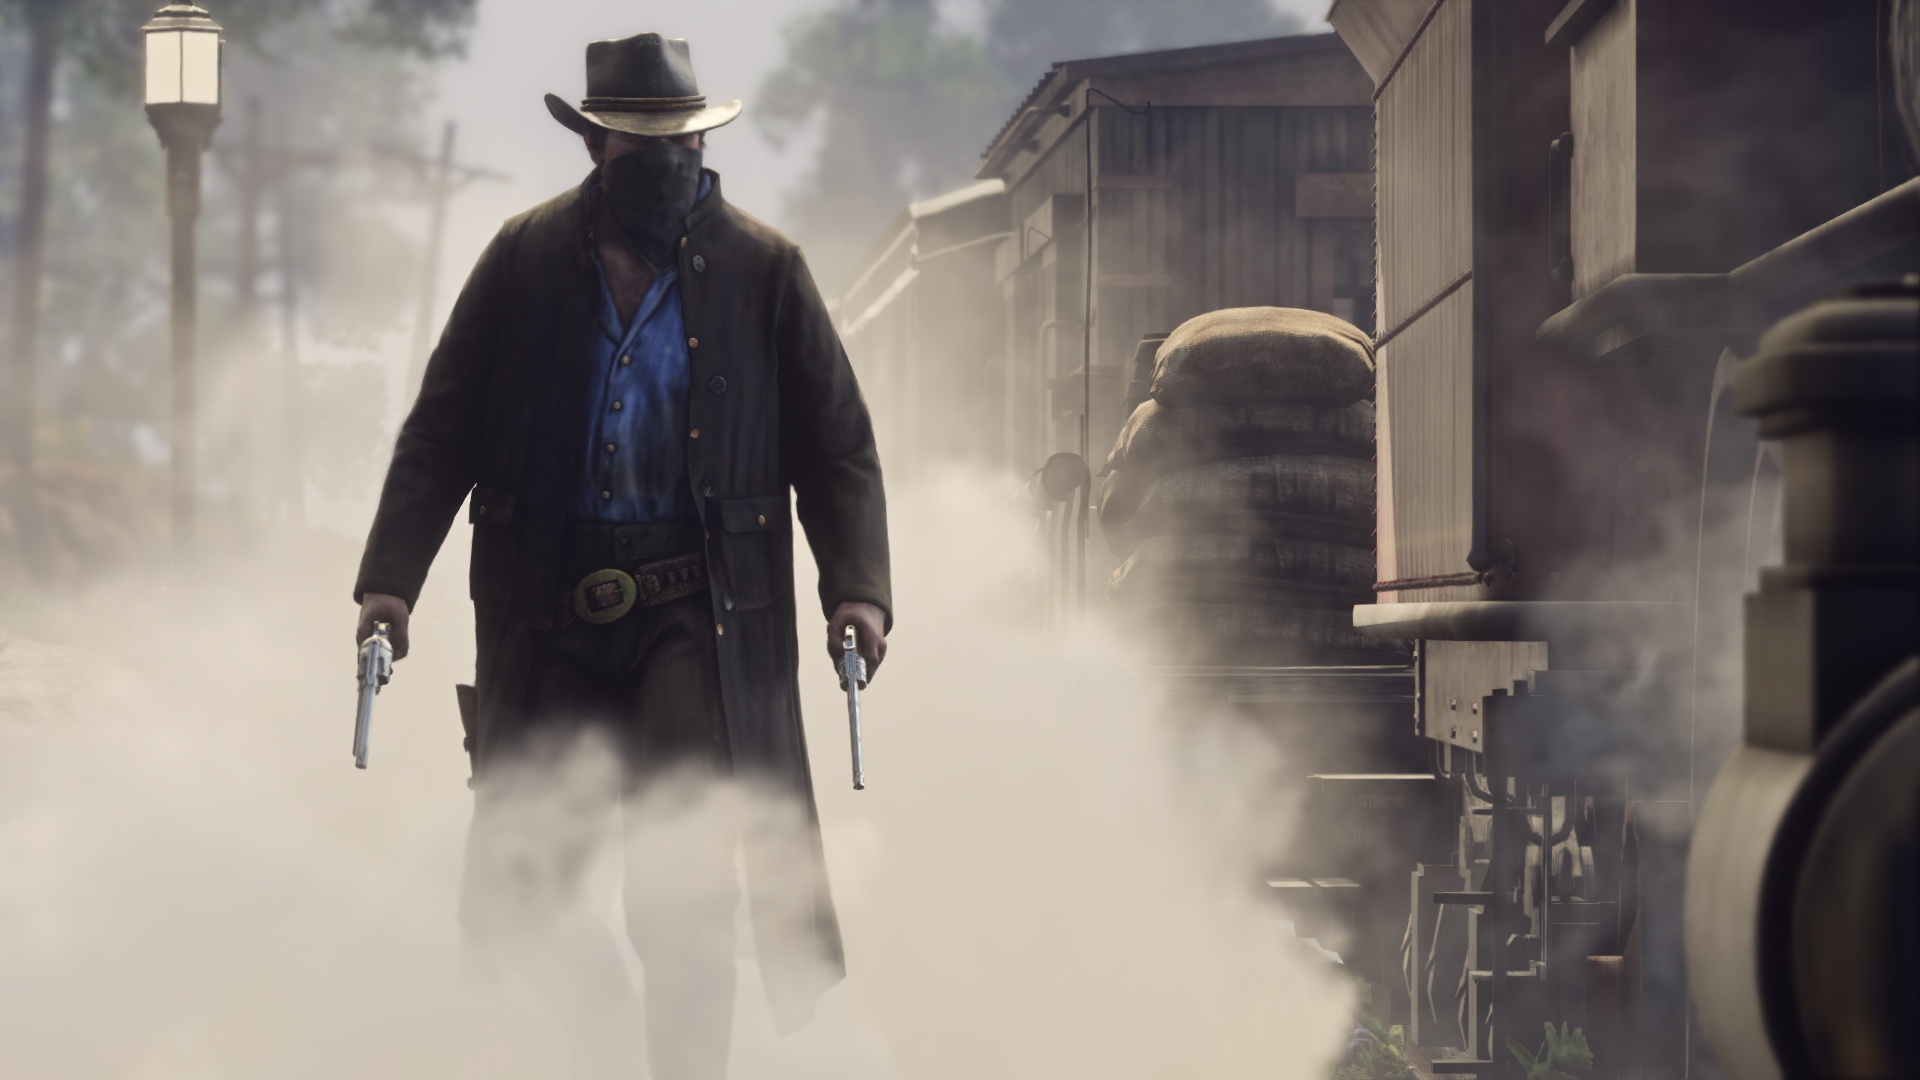 Unlock your First Red Dead Redemption 2 Weapon Now!